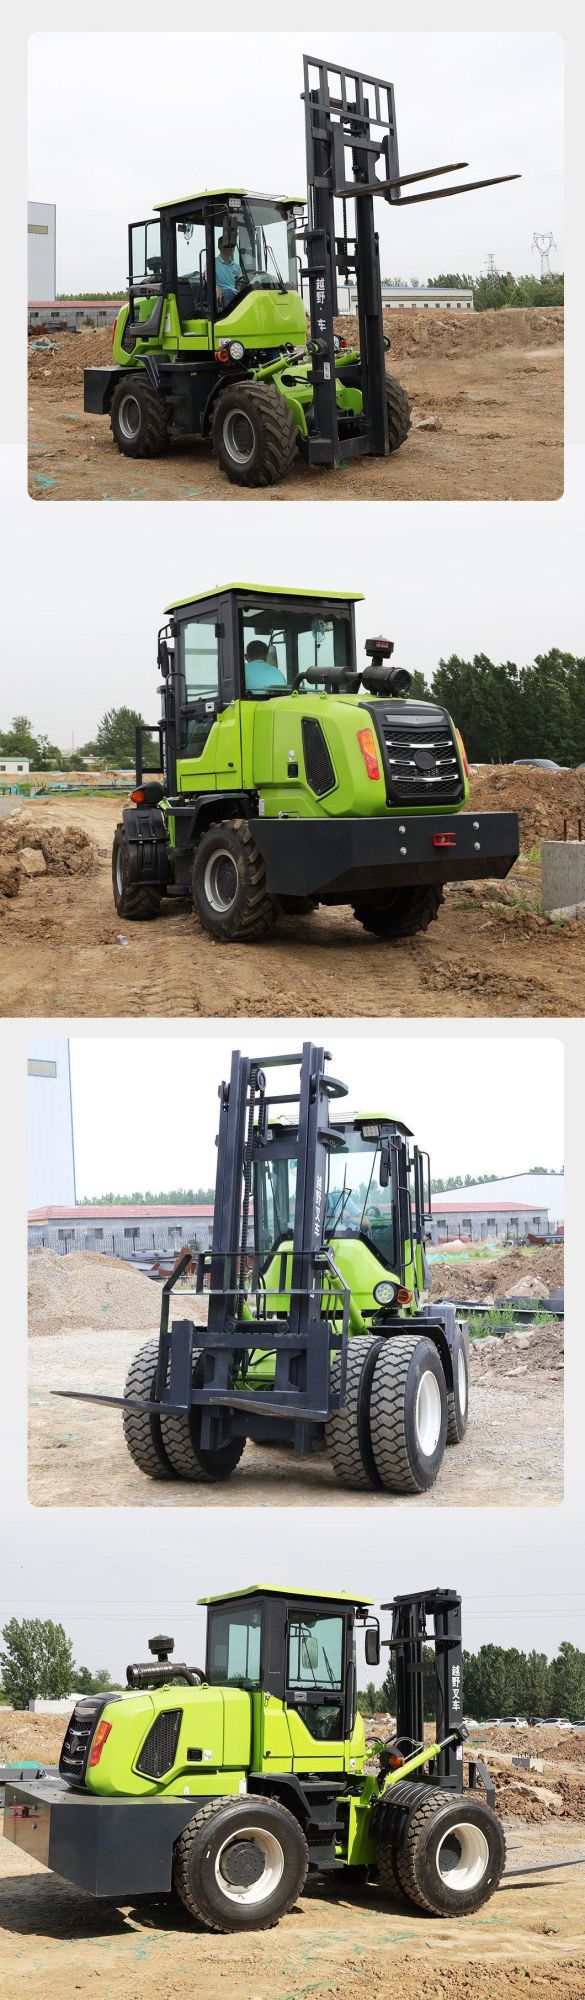 Hot Sale Forklift Cheap Non-Slip off-Road 3-5 Ton All Rough 5 Ton Forklift